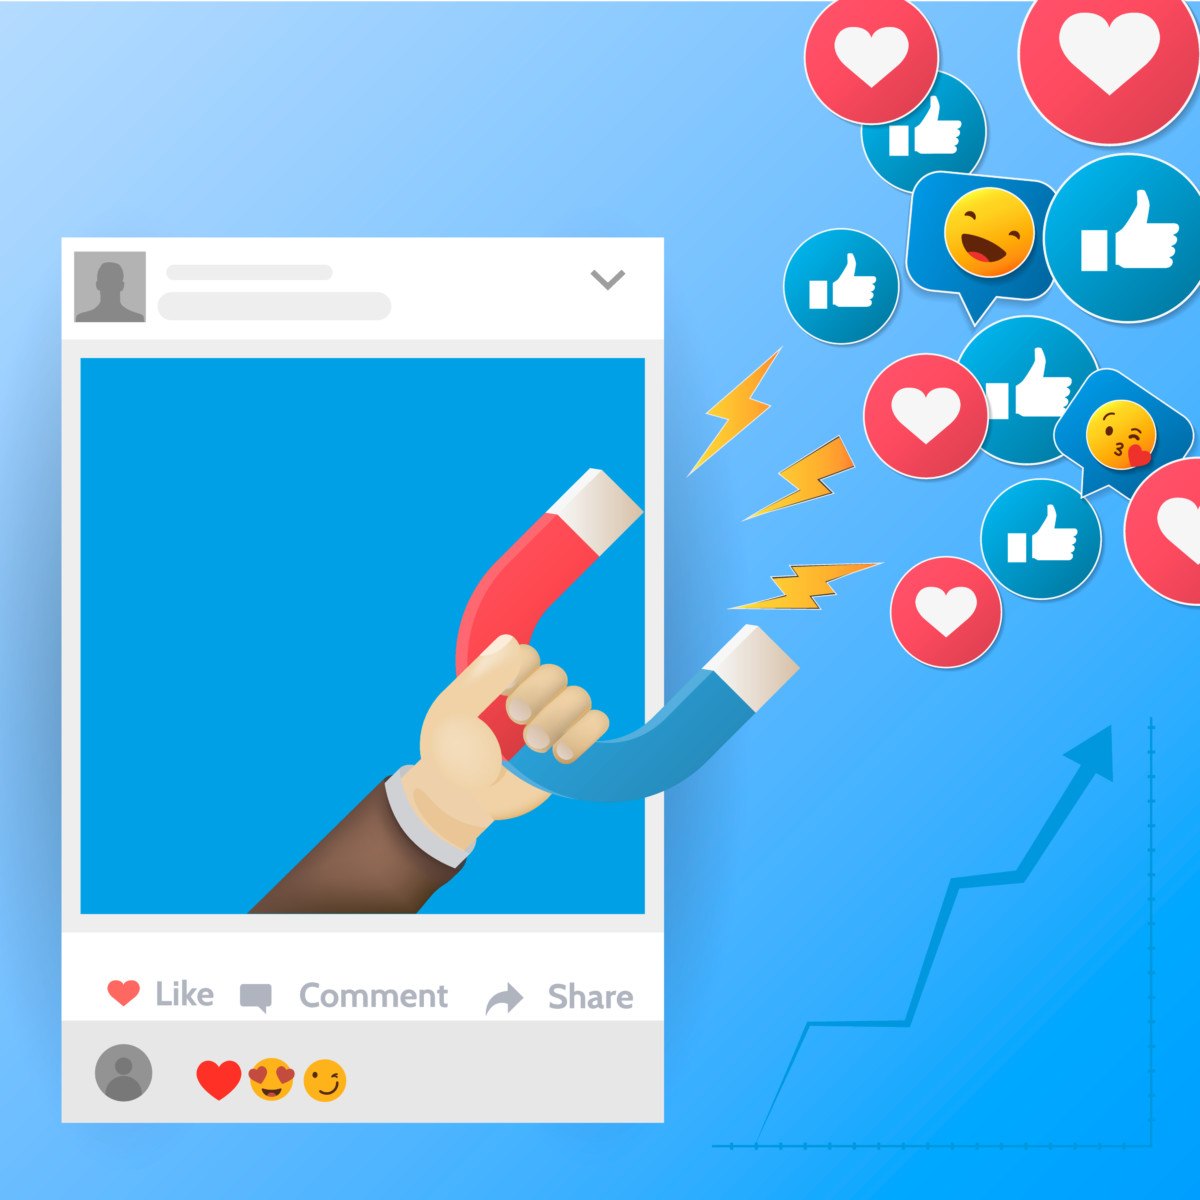 5 ways to increase your organic reach on facebook | newsfeed.org